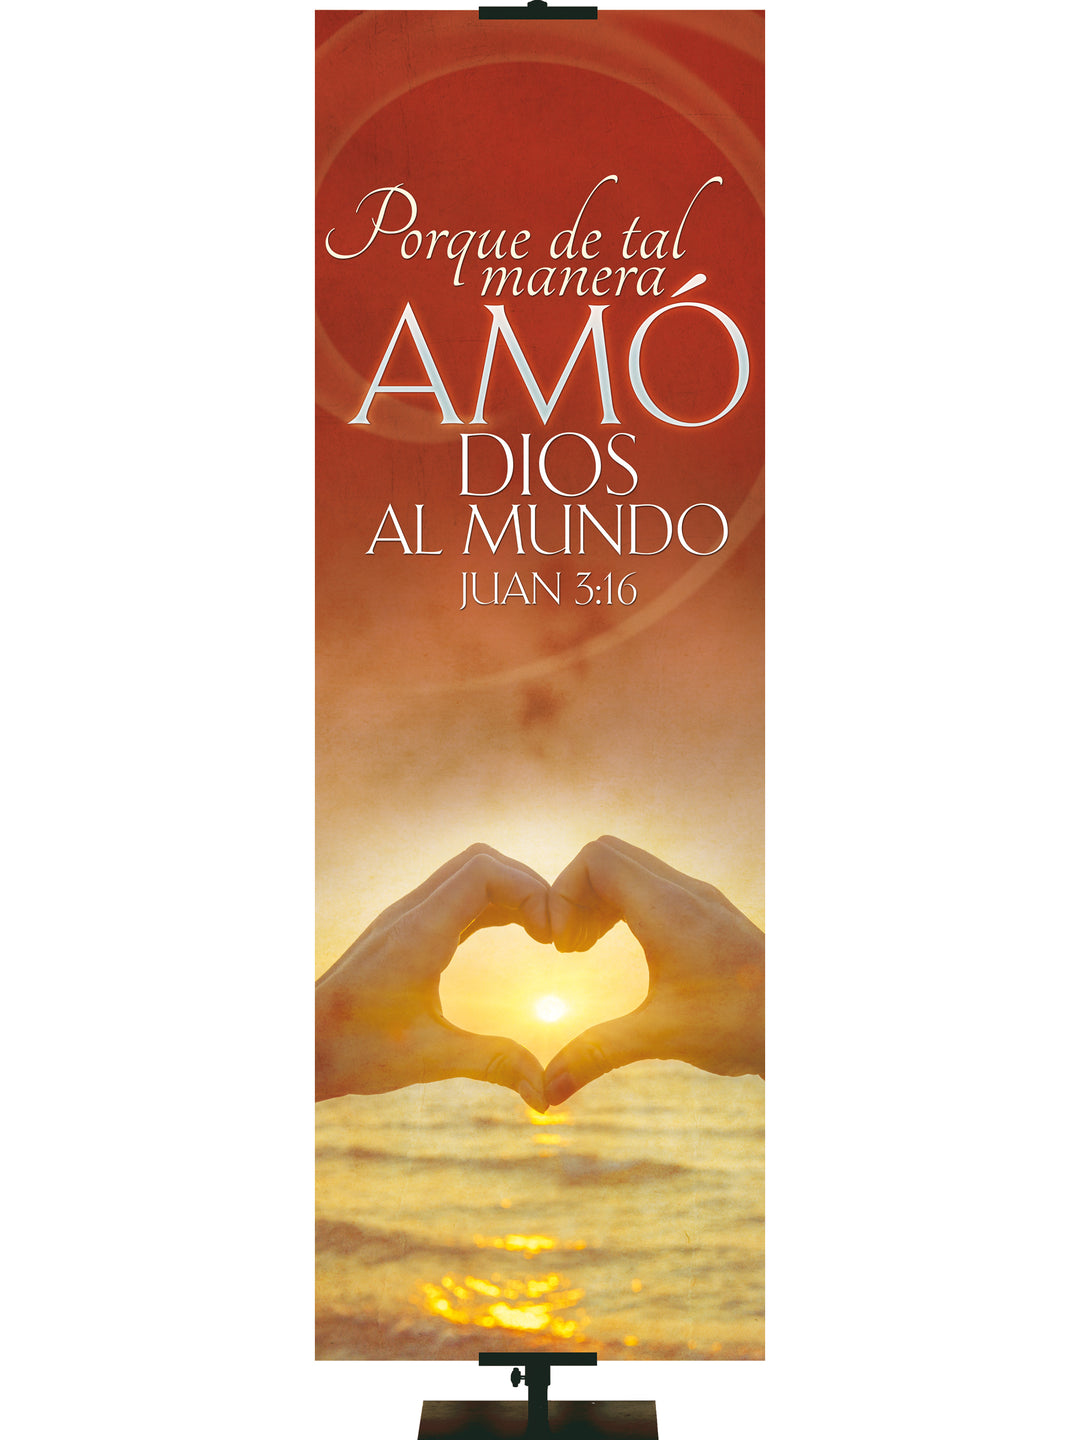 Spanish Expressions of Love For God So Loved the World - Year Round Banners - PraiseBanners